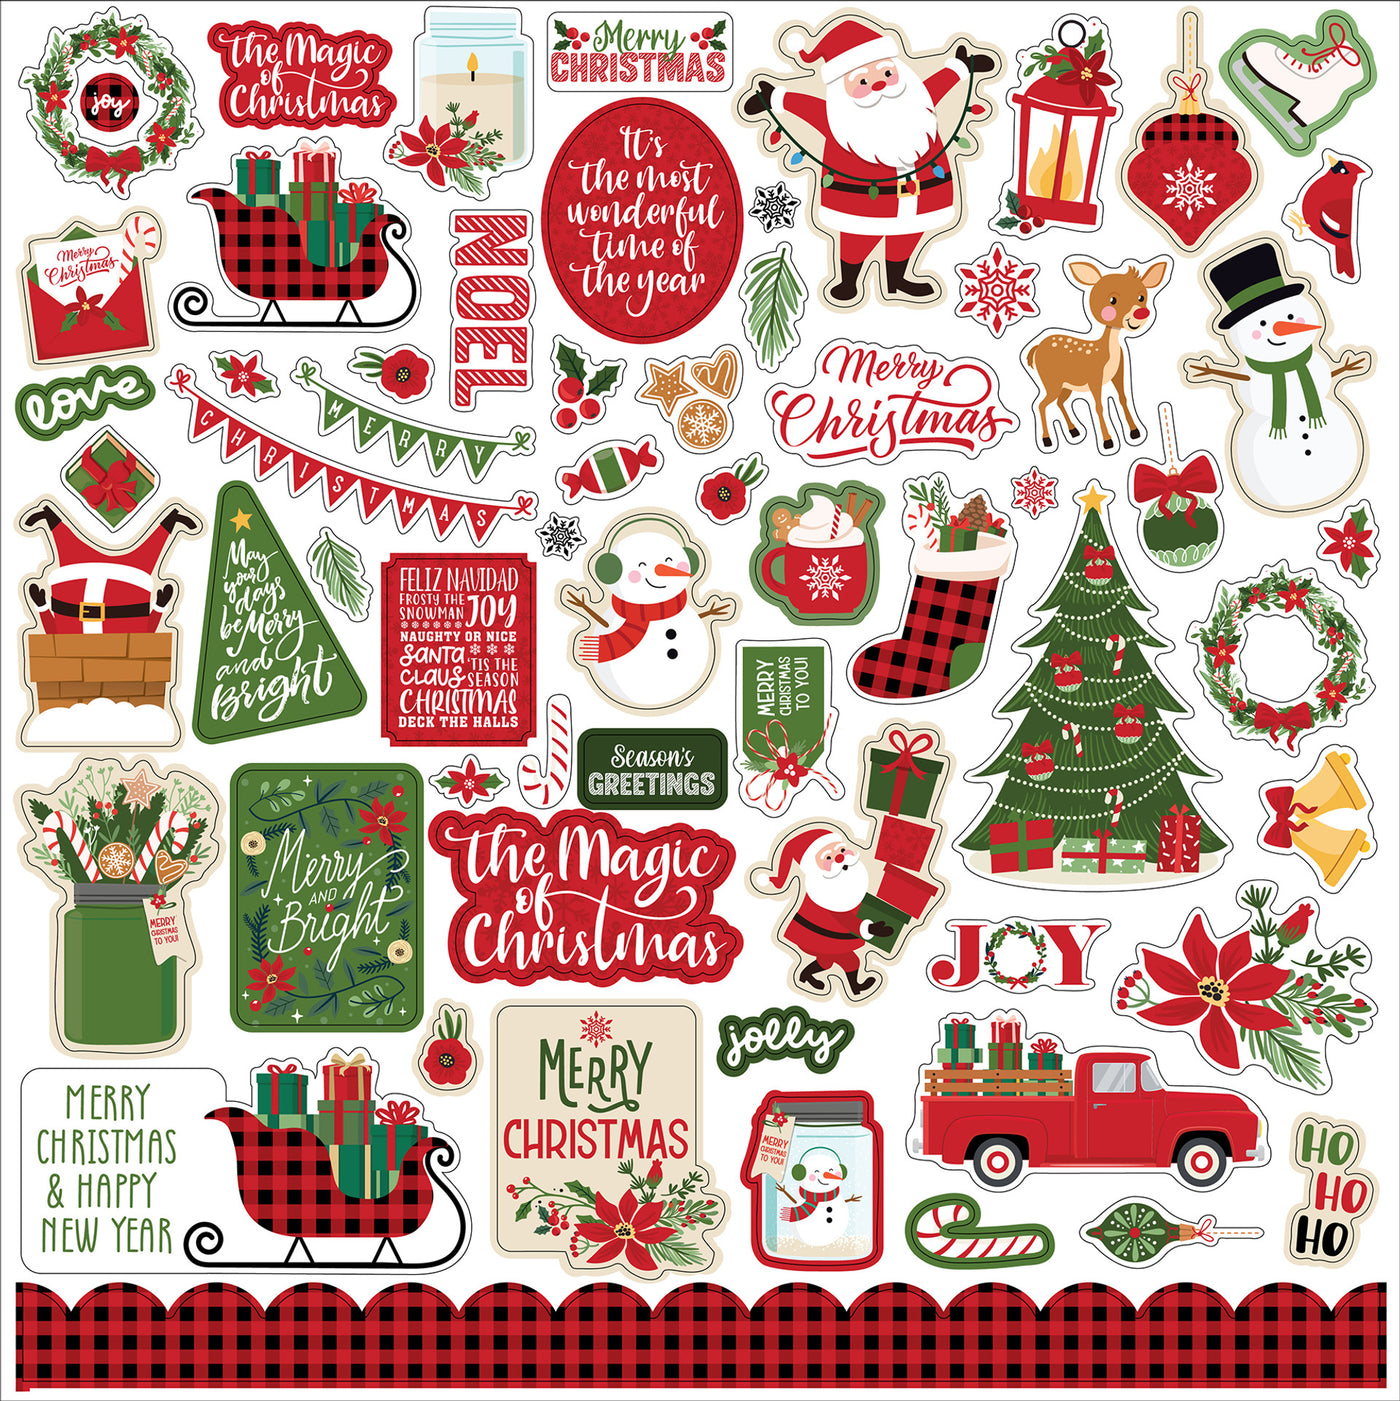 The Magic of Christmas Elements 12" x 12" Cardstock Stickers from the Magic of Christmas Christmas Collection by Echo Park. These stickers include Santa, snowmen, a Christmas tree, a sleigh, banners, borders, and more!